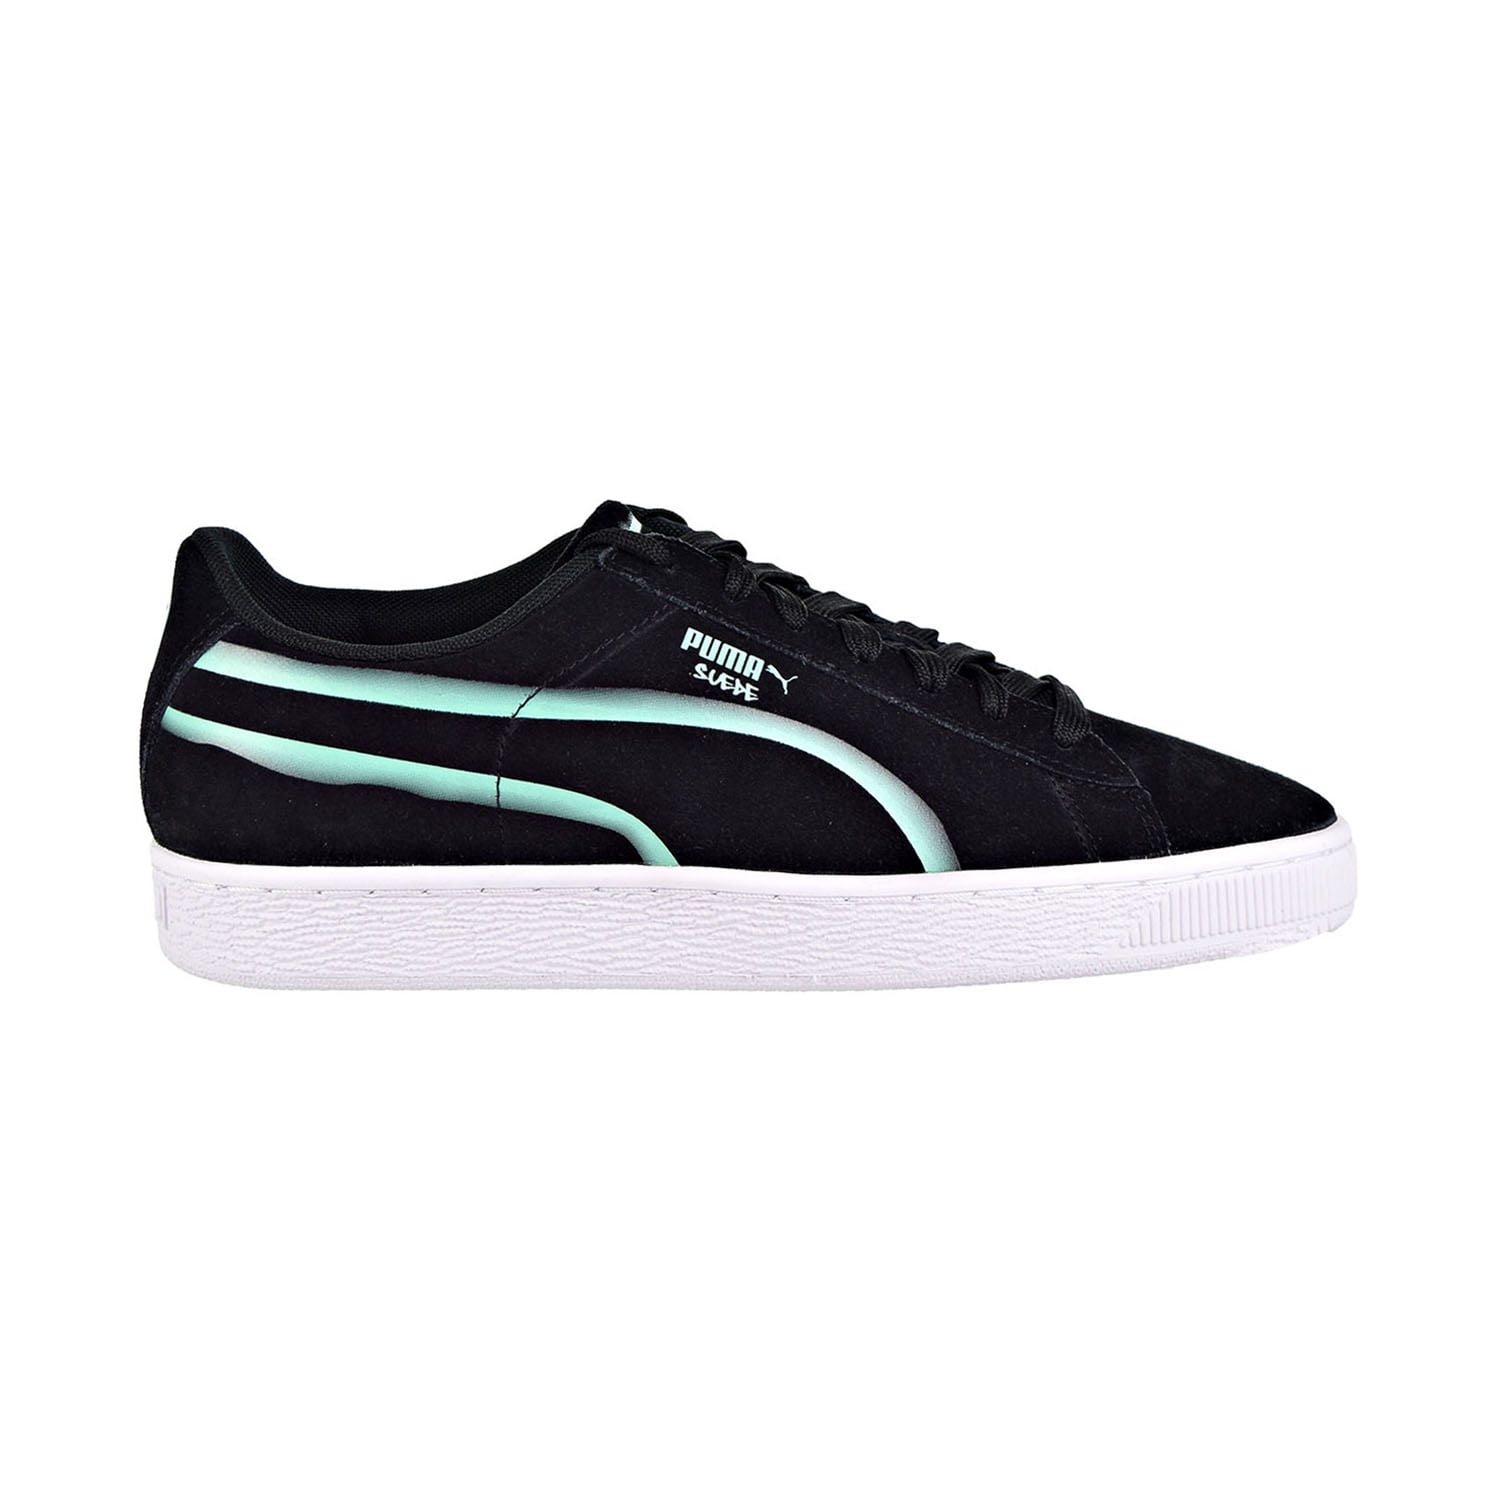 Shoes Puma Black/Biscay Green 367394-01 